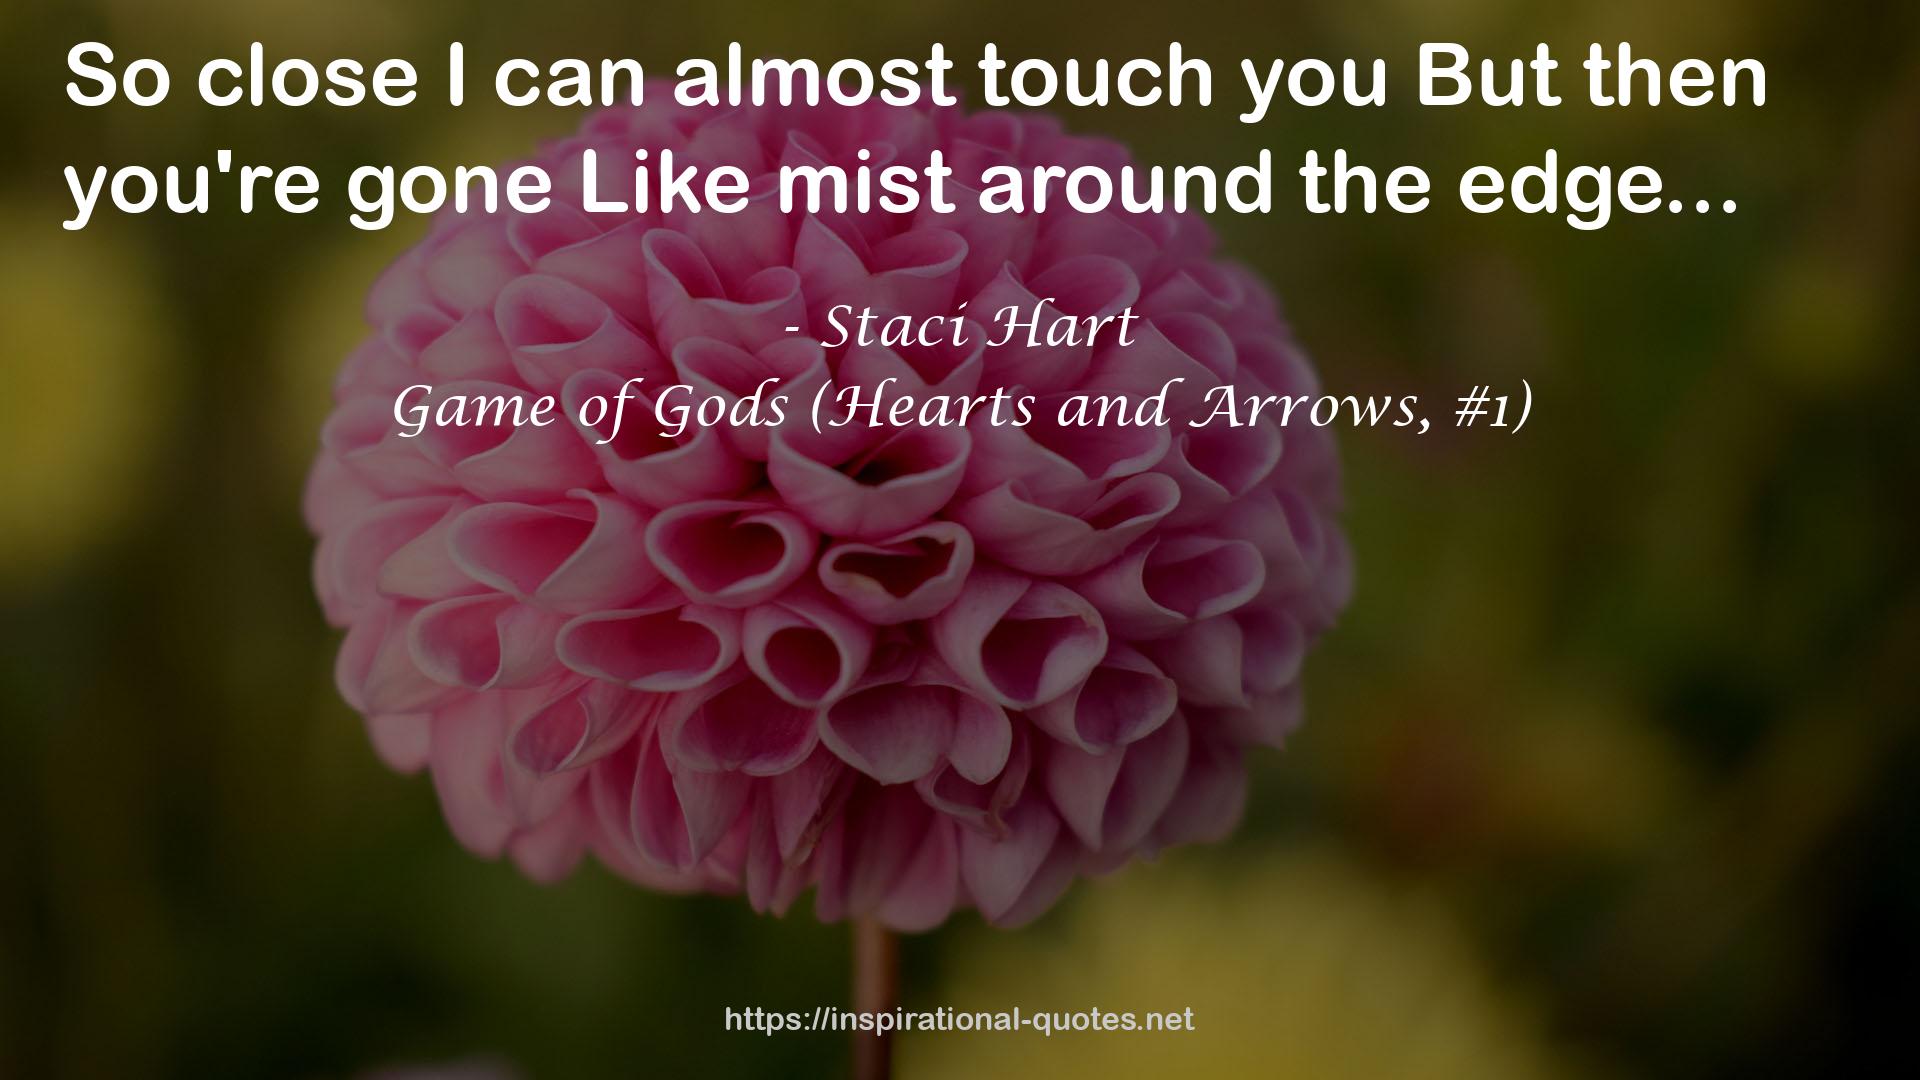 Game of Gods (Hearts and Arrows, #1) QUOTES